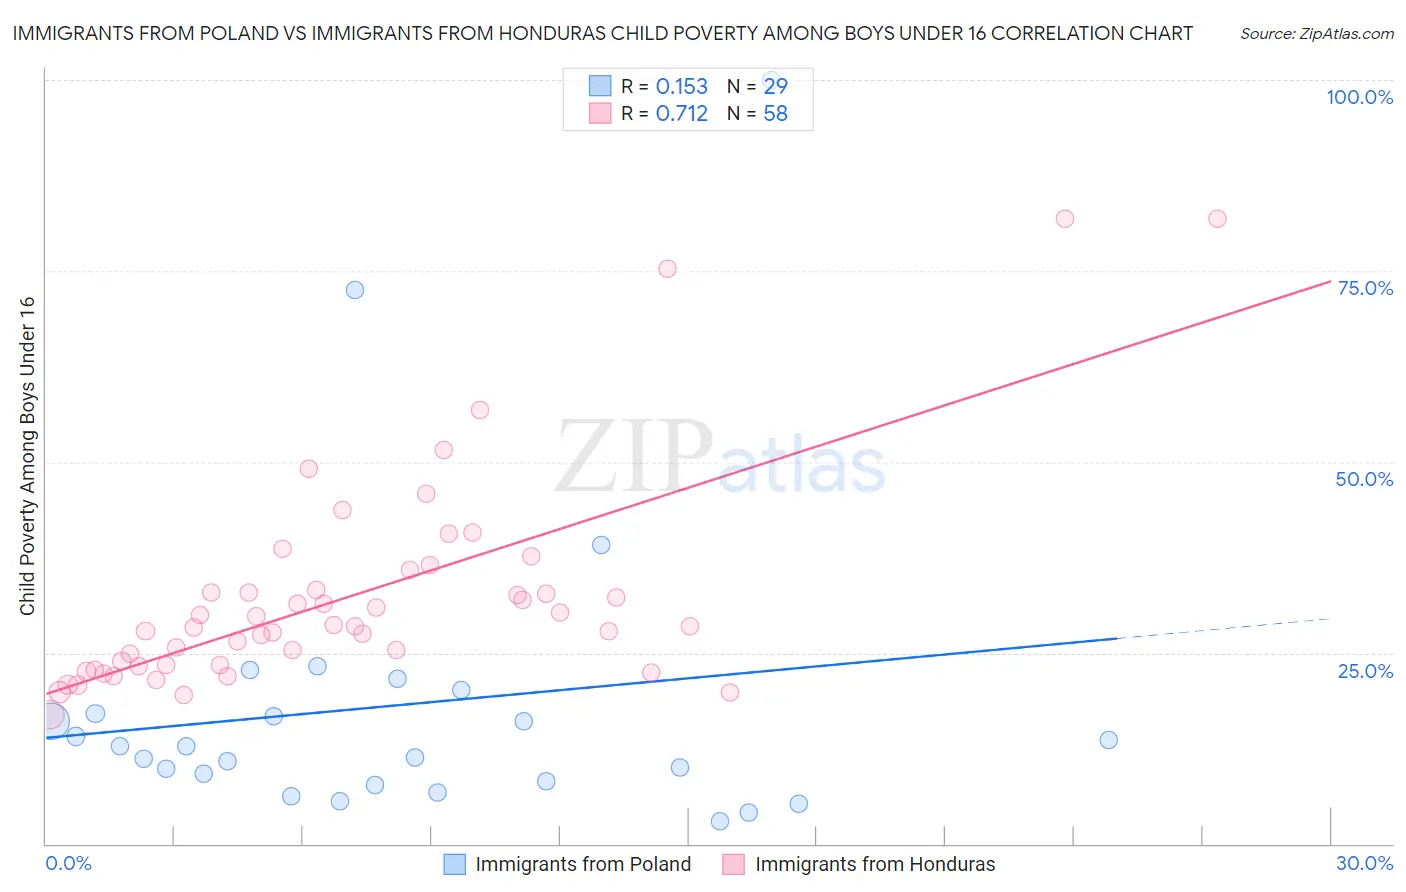 Immigrants from Poland vs Immigrants from Honduras Child Poverty Among Boys Under 16